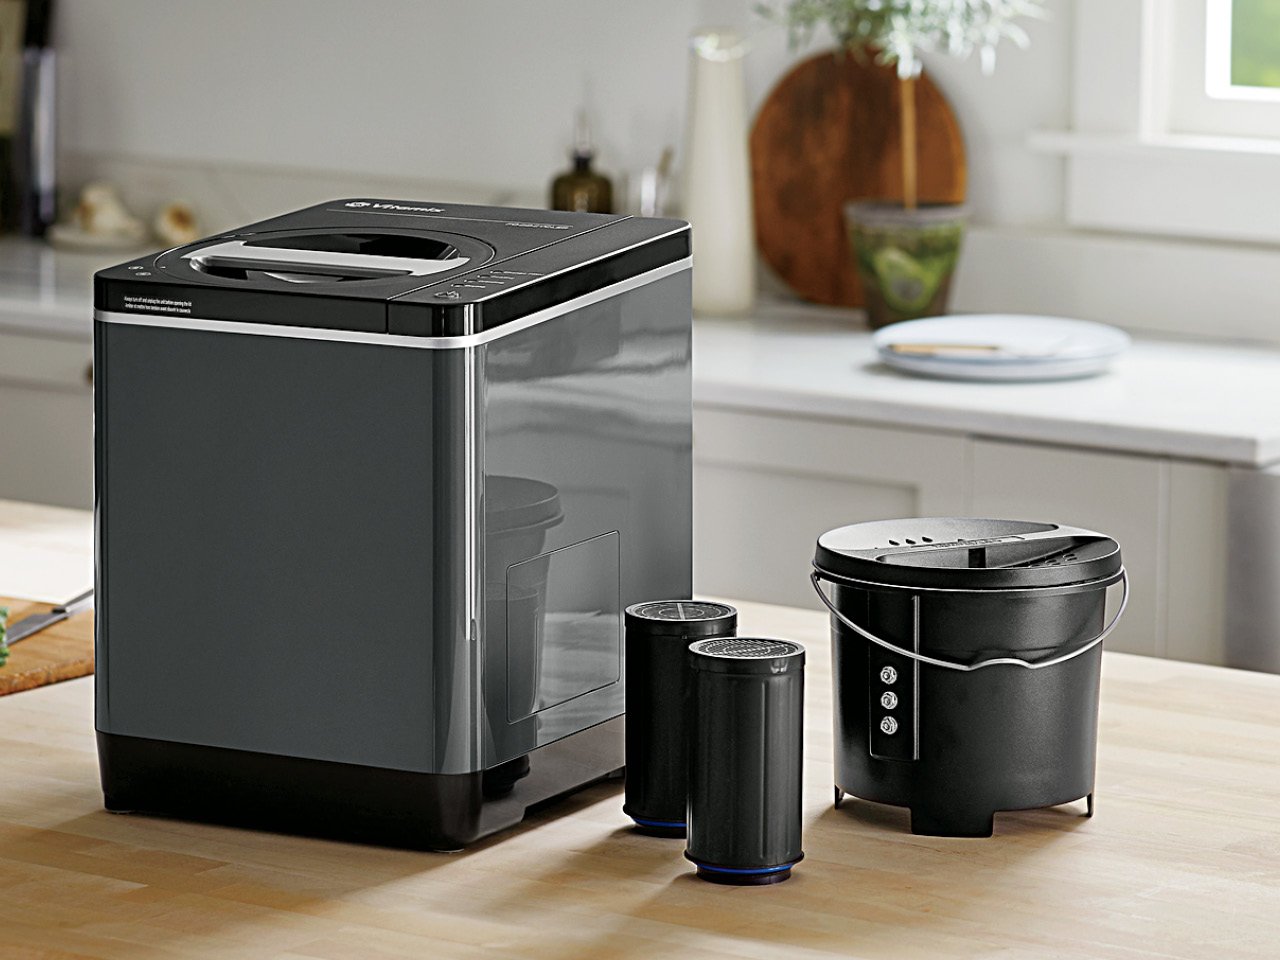 https://chatelaine.com/wp-content/uploads/2022/05/countertop-composter-vitamix-foodcycler.jpg